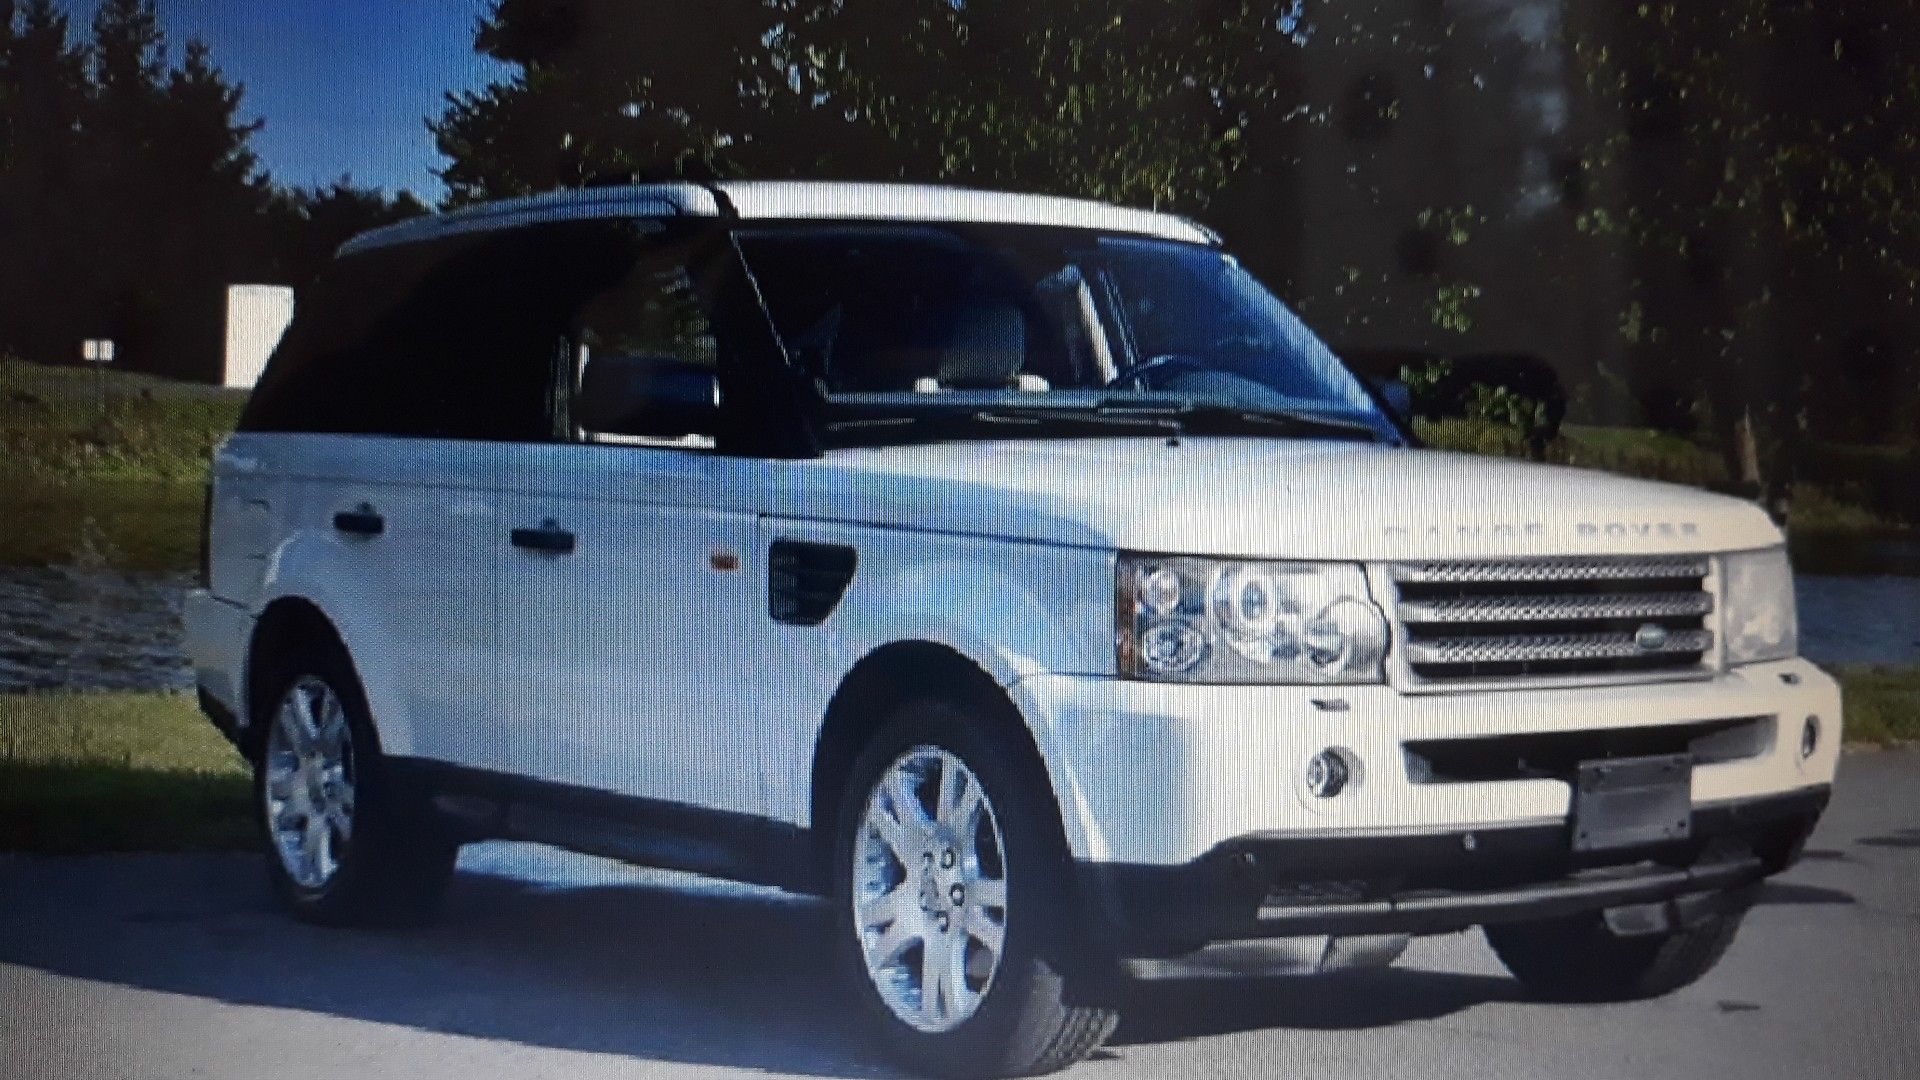 Perfect 2k6 Range Rover Sport for sale•I AM NOT ANSWER ON CHAT SO PLEASE leave me your E•MAI•L on CHAT and will send you INFO/PICS!